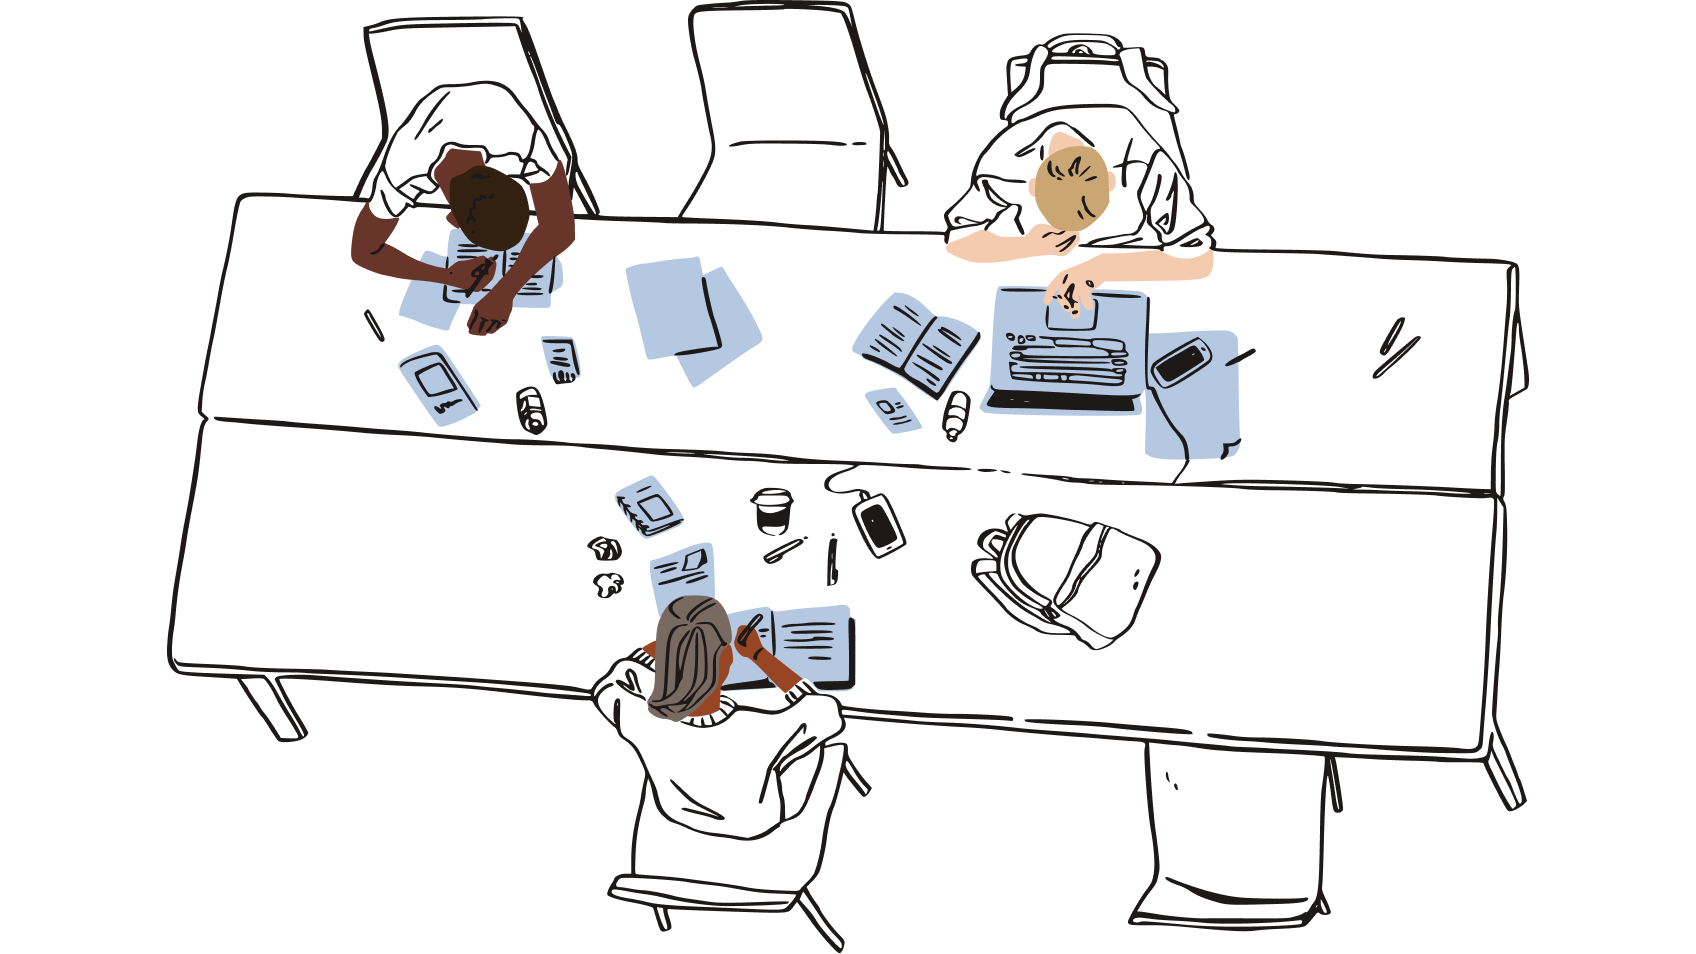 Illustration of a group of people sat in a shared workspace, surrounded by scraps of paper, representing the risk of leaving physical copies of passwords near your desk.